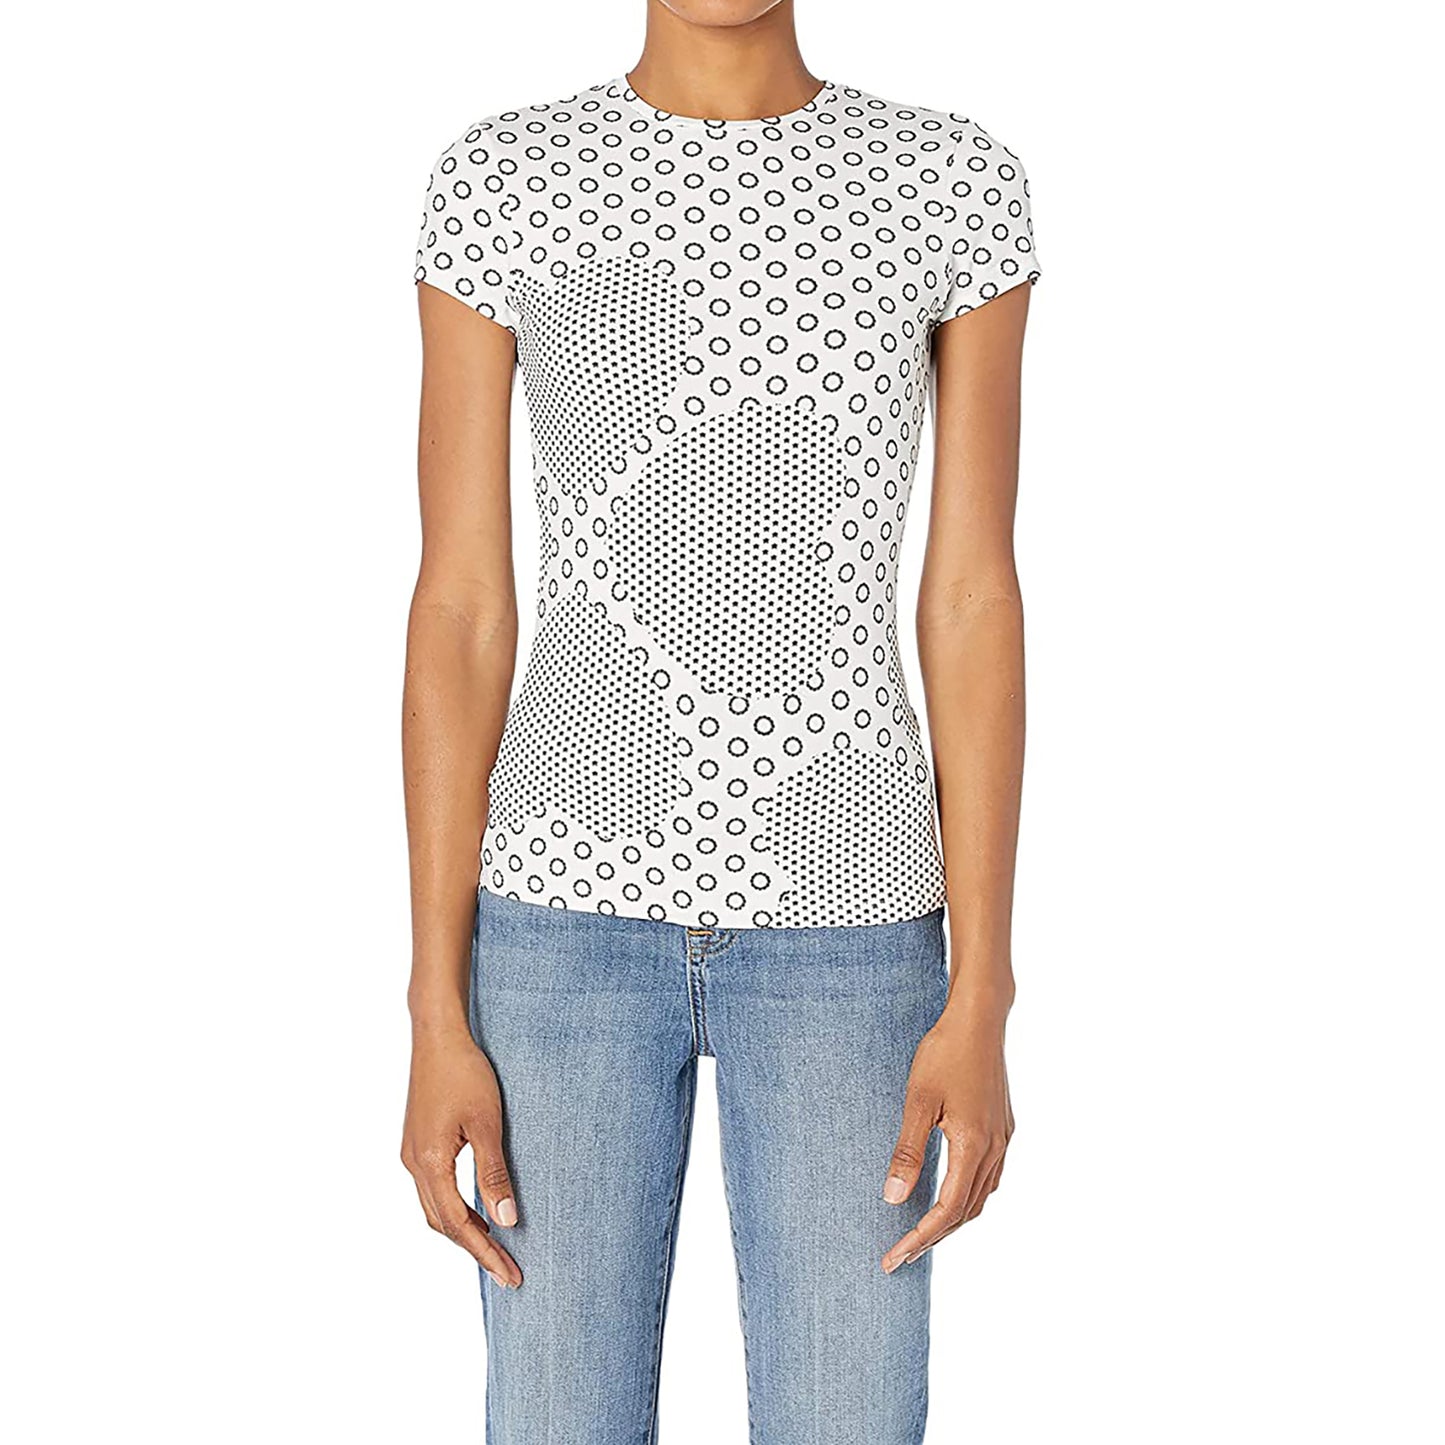 Ted Baker Women's Black White Heart Print Sirah Printed Stretch Fitted Tee T-Shirt